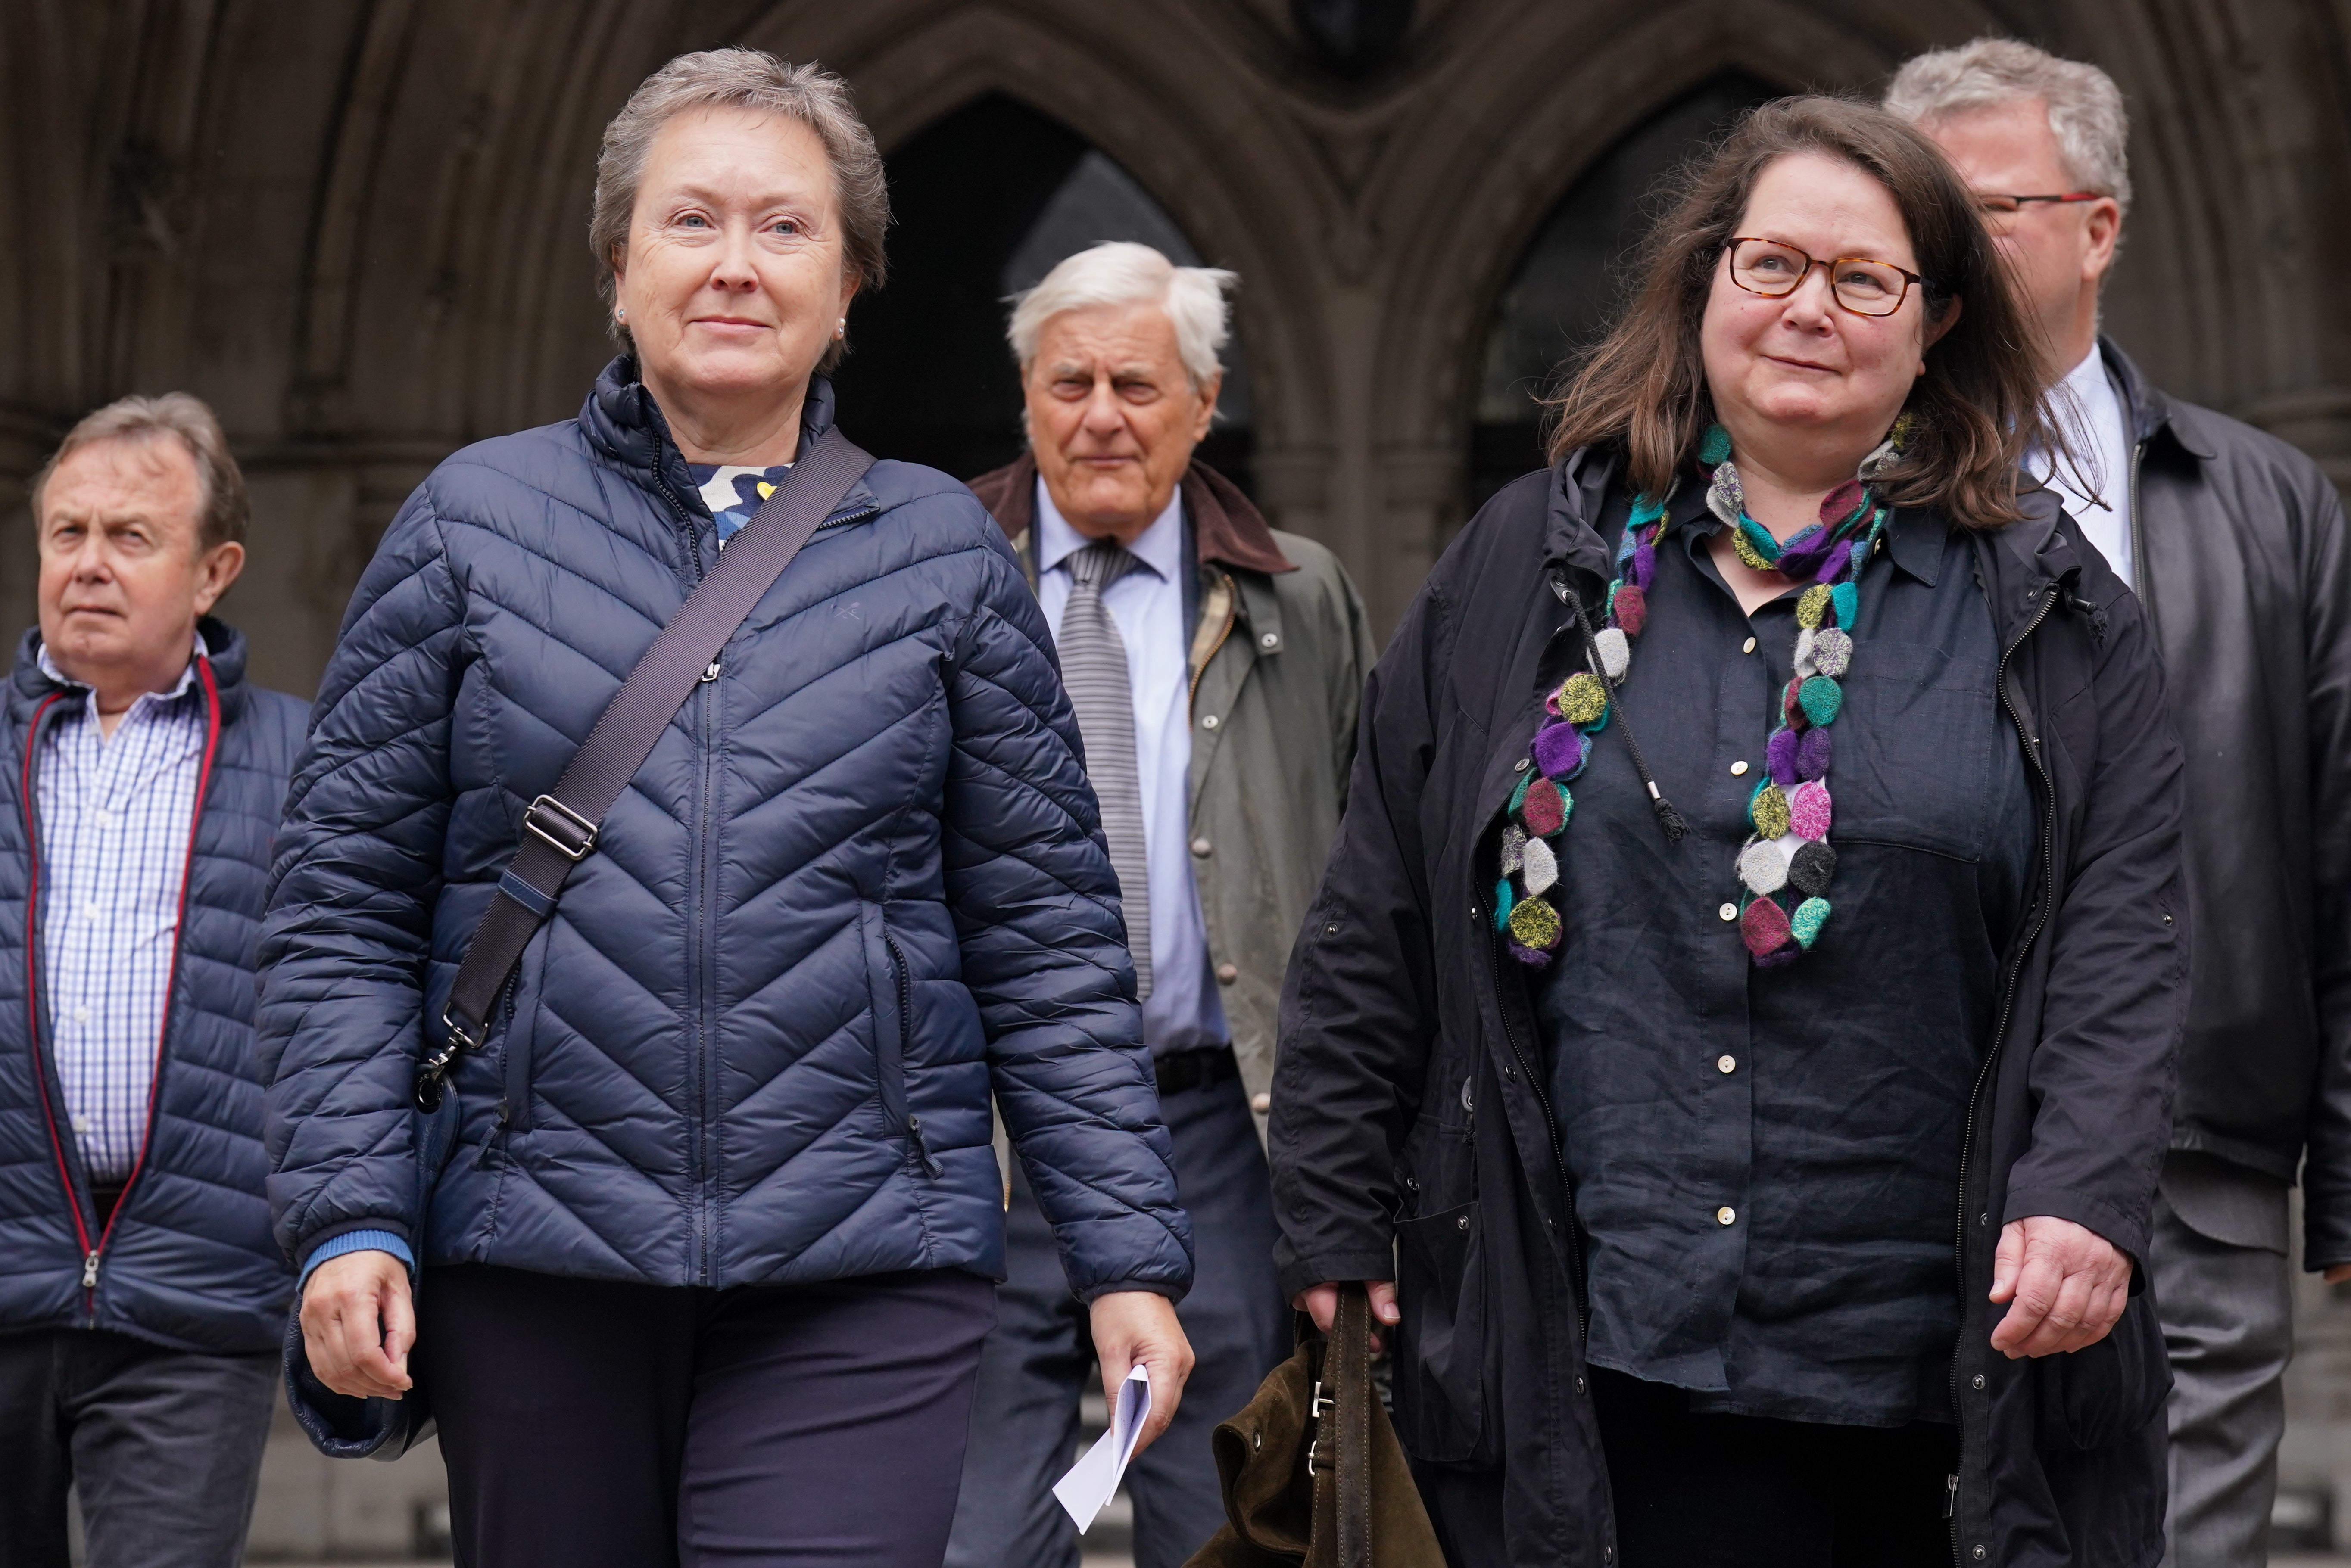 Cathy Gardner and Fay Harris, whose fathers died from Covid-19, leave the Royal Courts of Justice